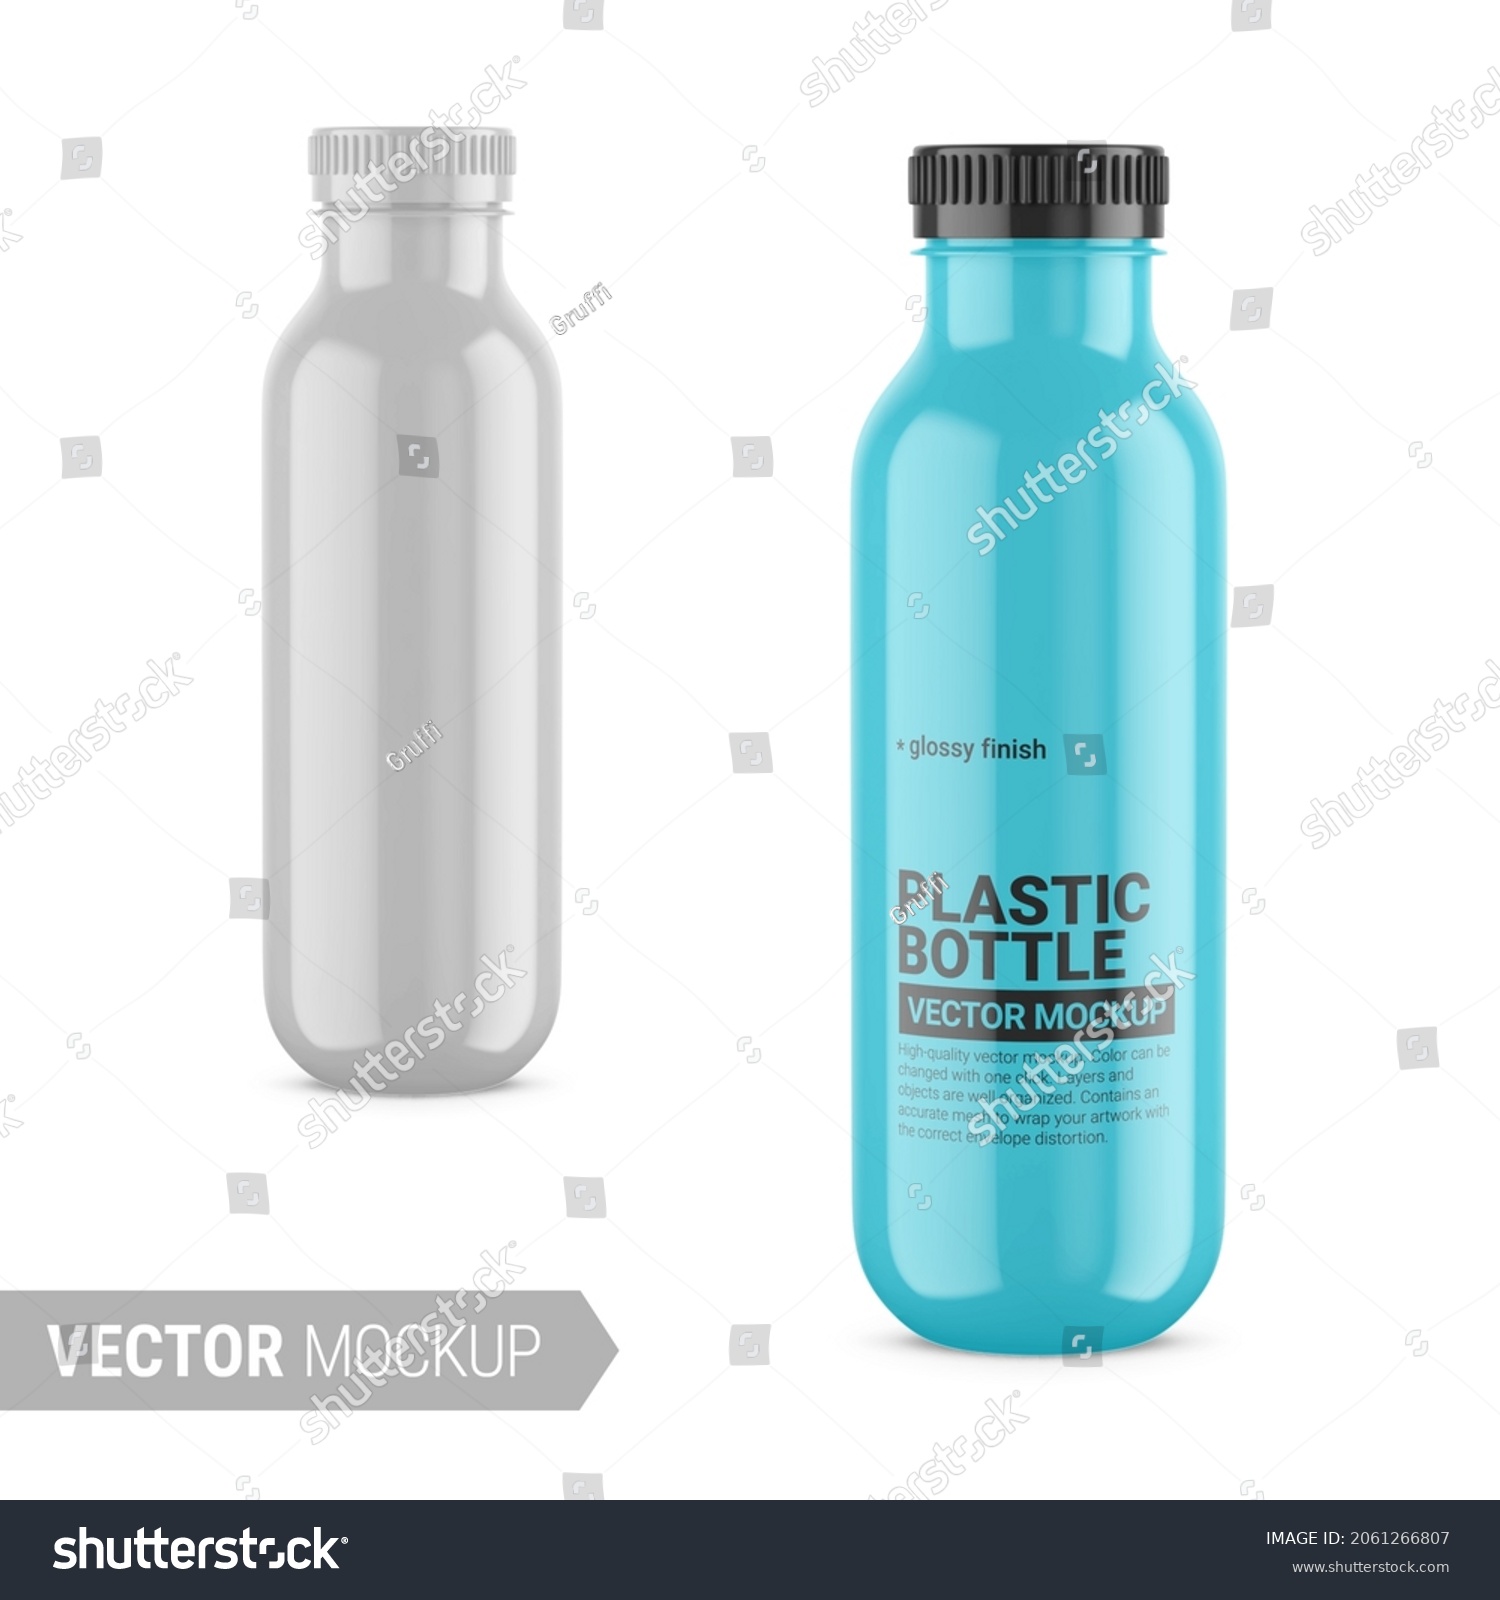 SVG of White glossy plastic bottle. Photorealistic packaging mockup template. Vector 3d illustration with sample design. Contains an accurate mesh to wrap your artwork with the correct envelope distortion svg